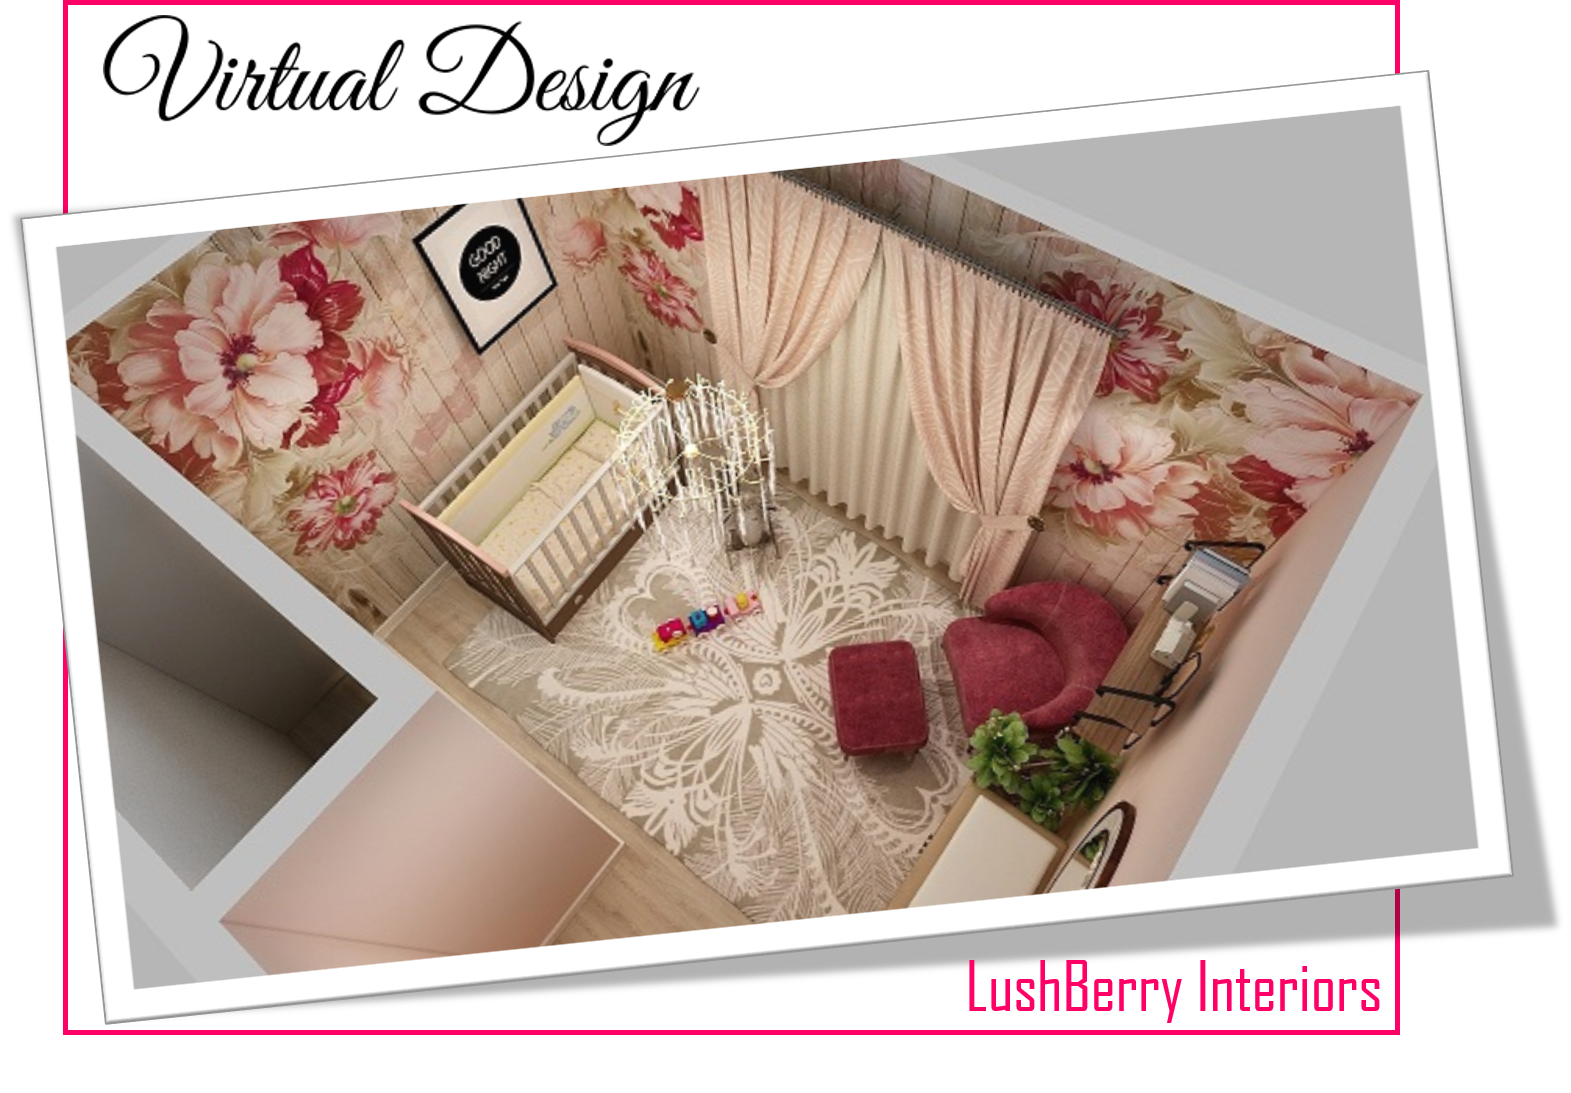 Virtual Design Services by LushBerry Interiors